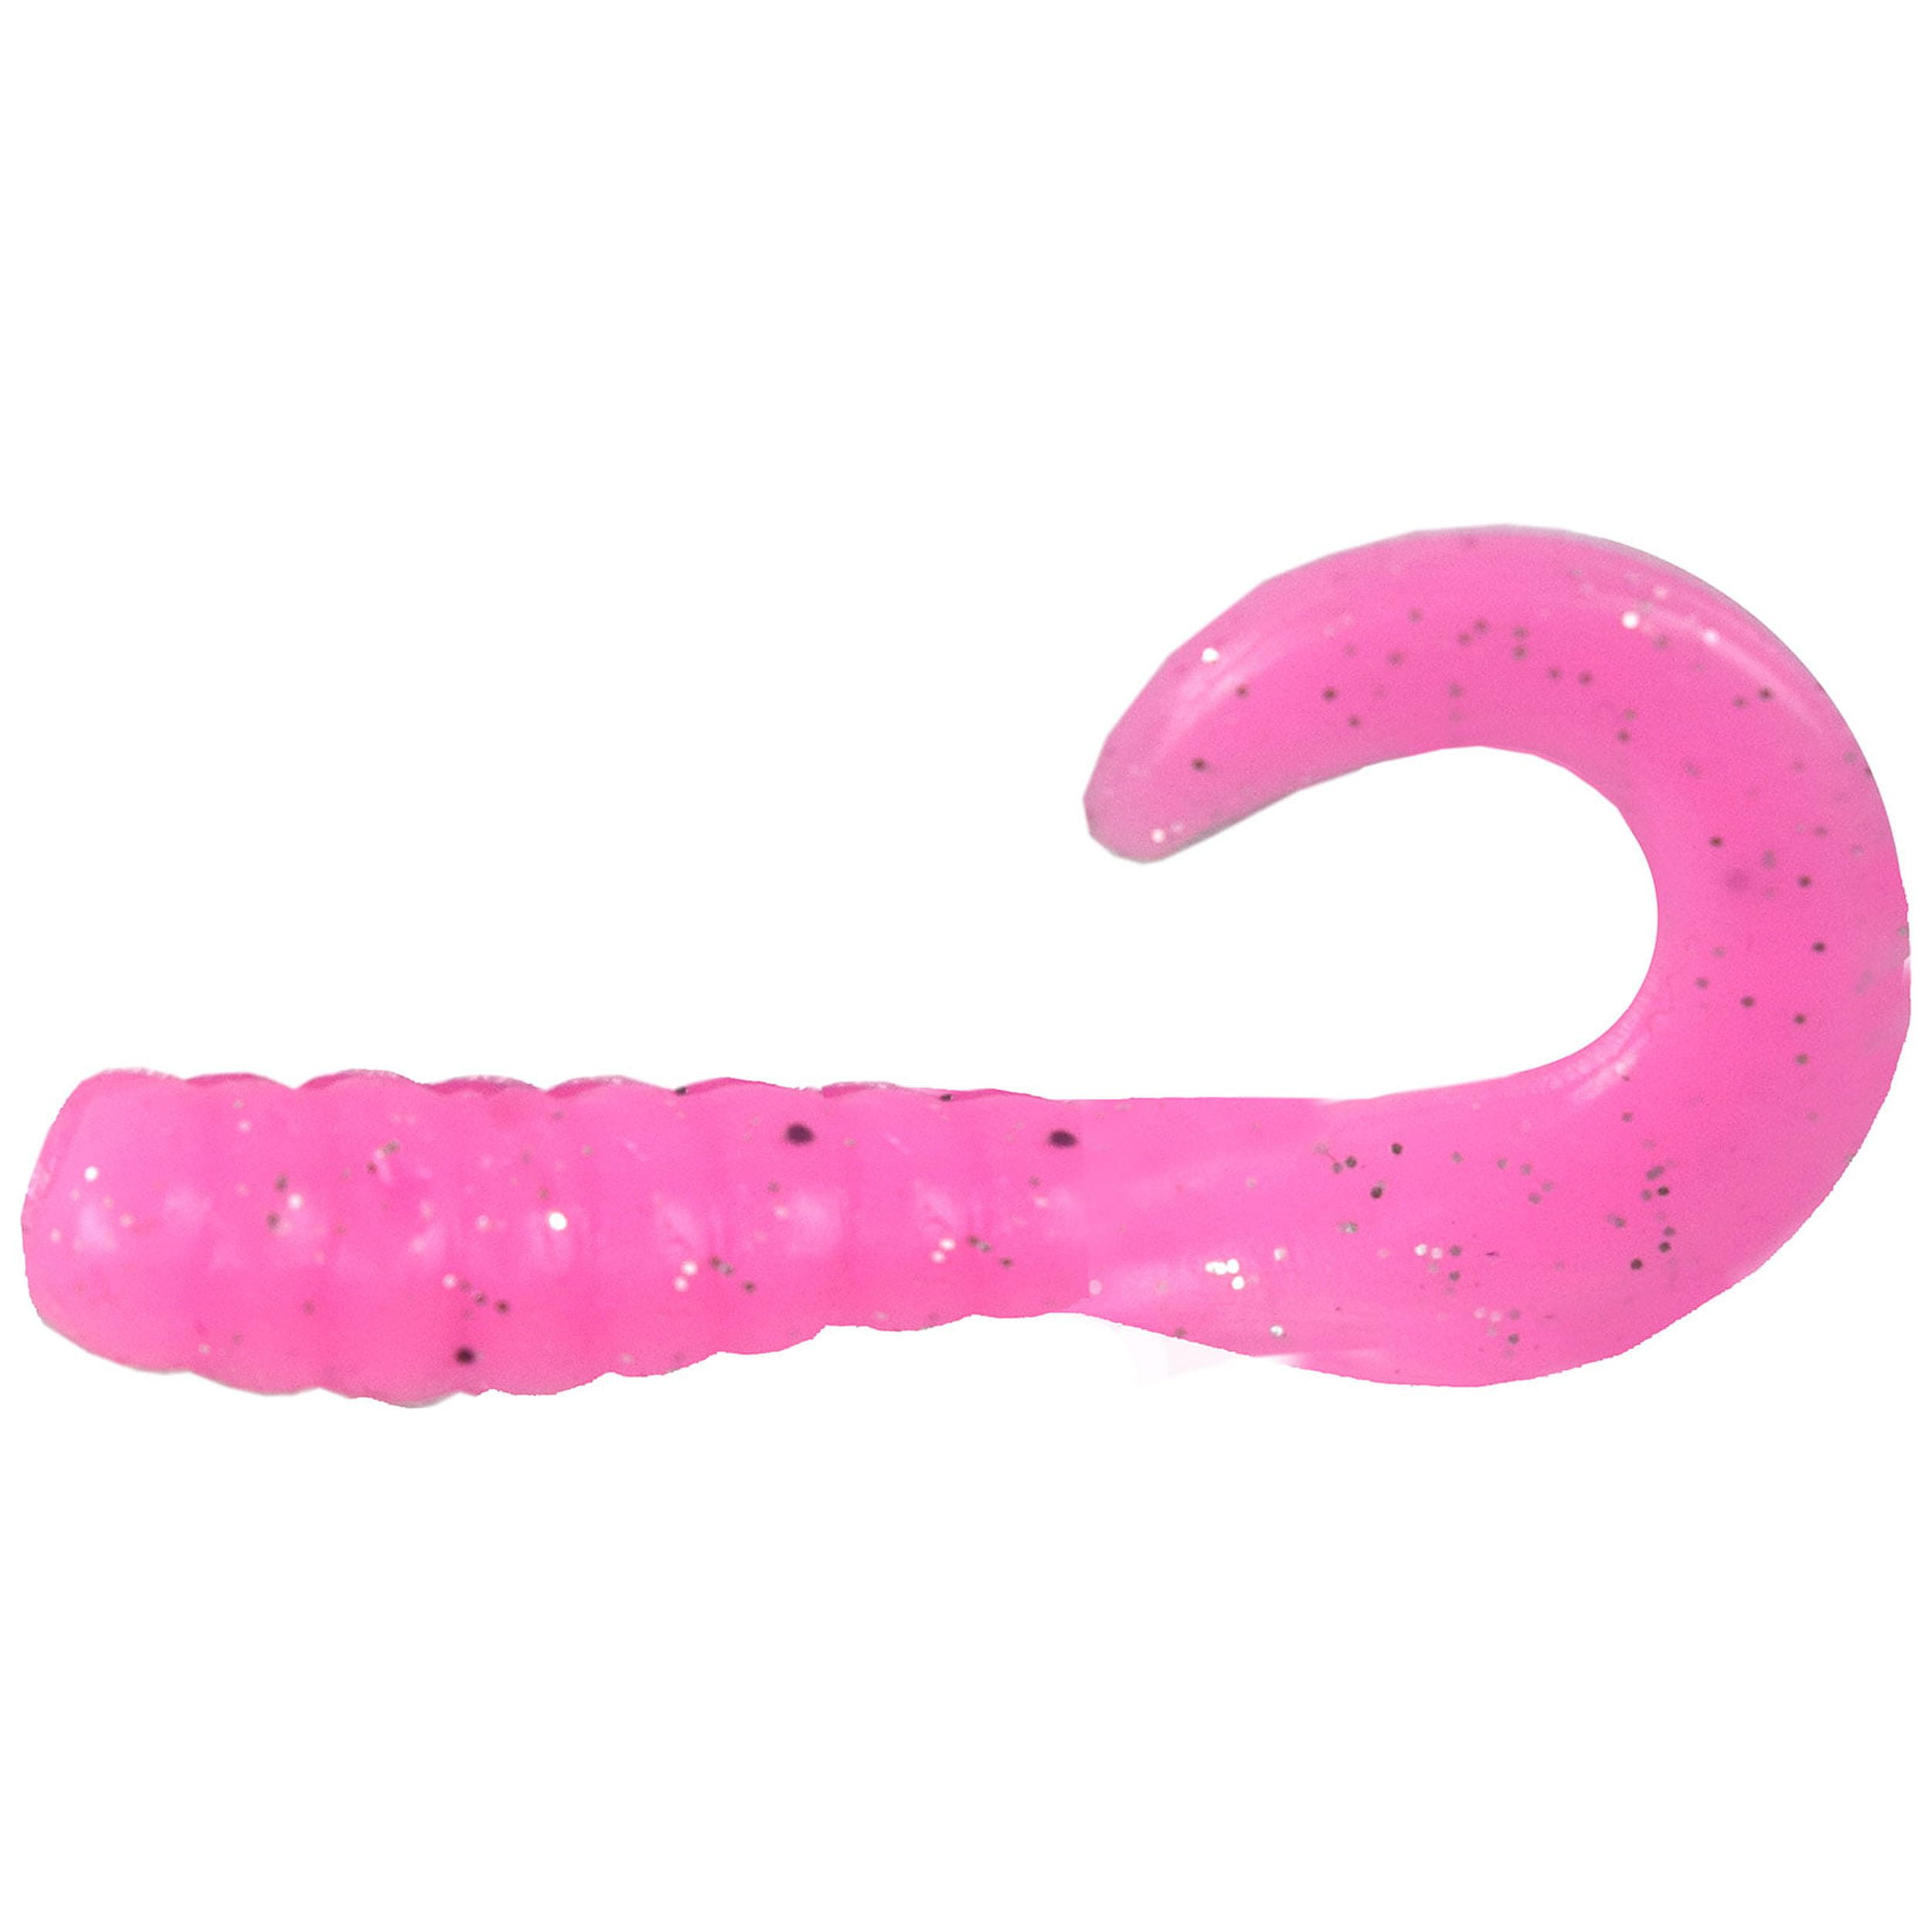 Tackle HD 40-Pack Grub Fishing Lures, 2-Inch Skirted Grub with Curly Tail,  Bulk Fishing Grubs for Crappie, Bass, Walleye, or Trout Bait, Freshwater or  Saltwater Swimbait, Pink/Silver Flake 